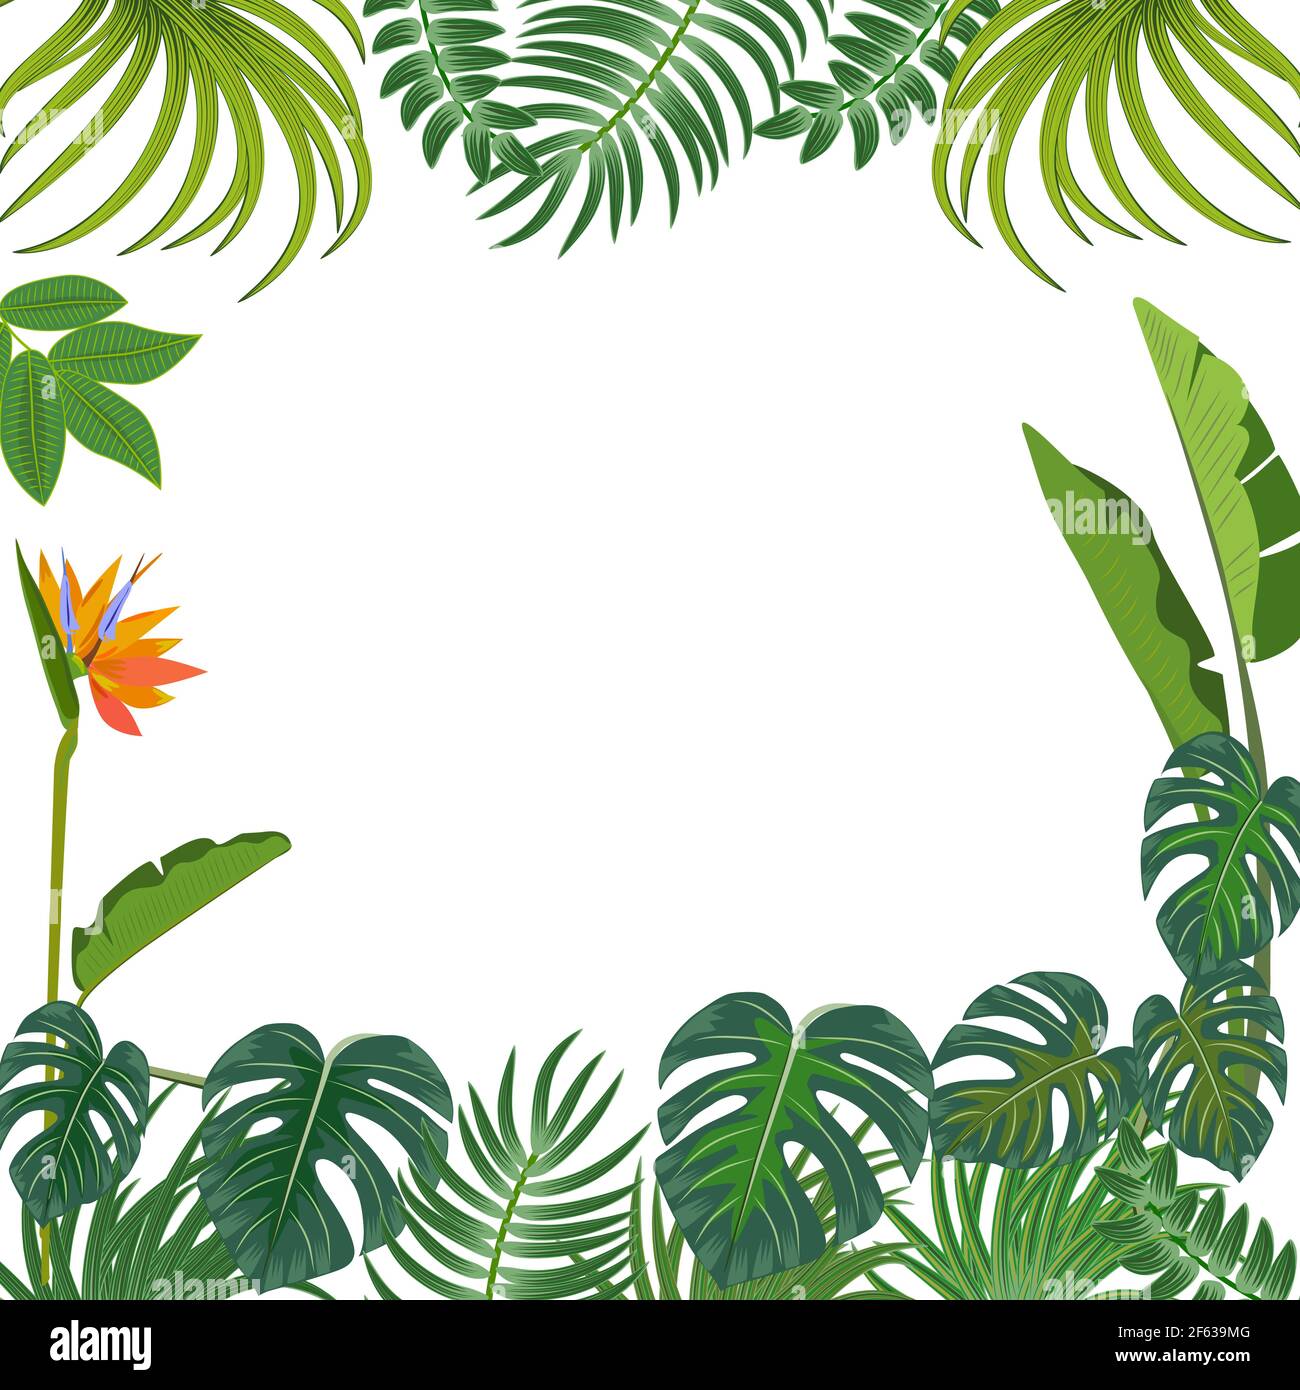 Vector tropical jungle background with palm trees and leaves. Stock Vector